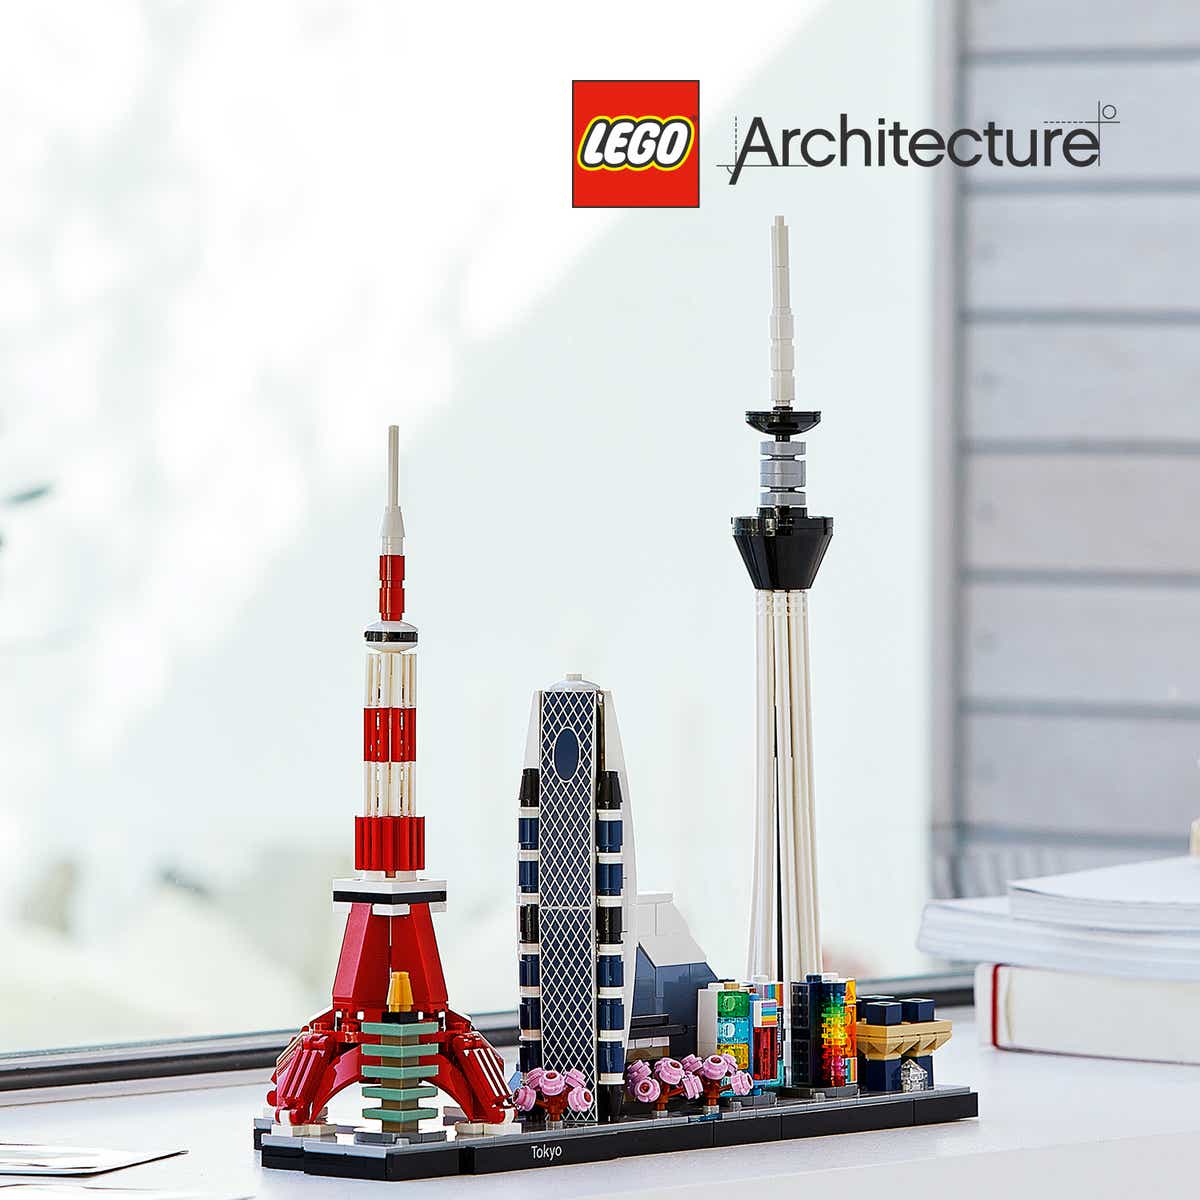 Release of LEGO Architecture Series “Tokyo 21051” and Chance to Own Limited  Edition Free Item - 最新情報 - LEGO.com JP